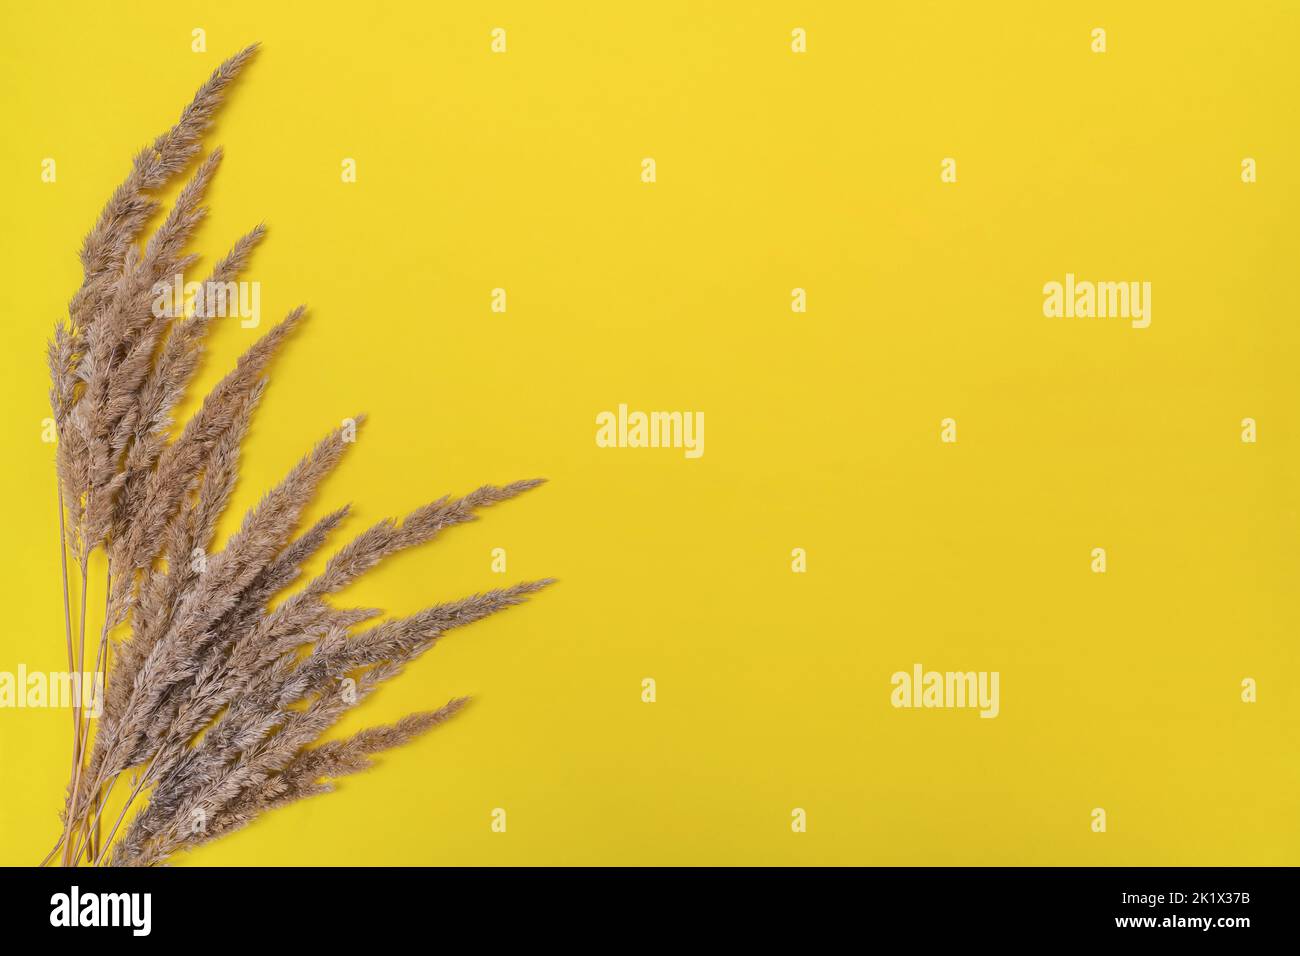 Dry decorative grass on a yellow background. Stock Photo